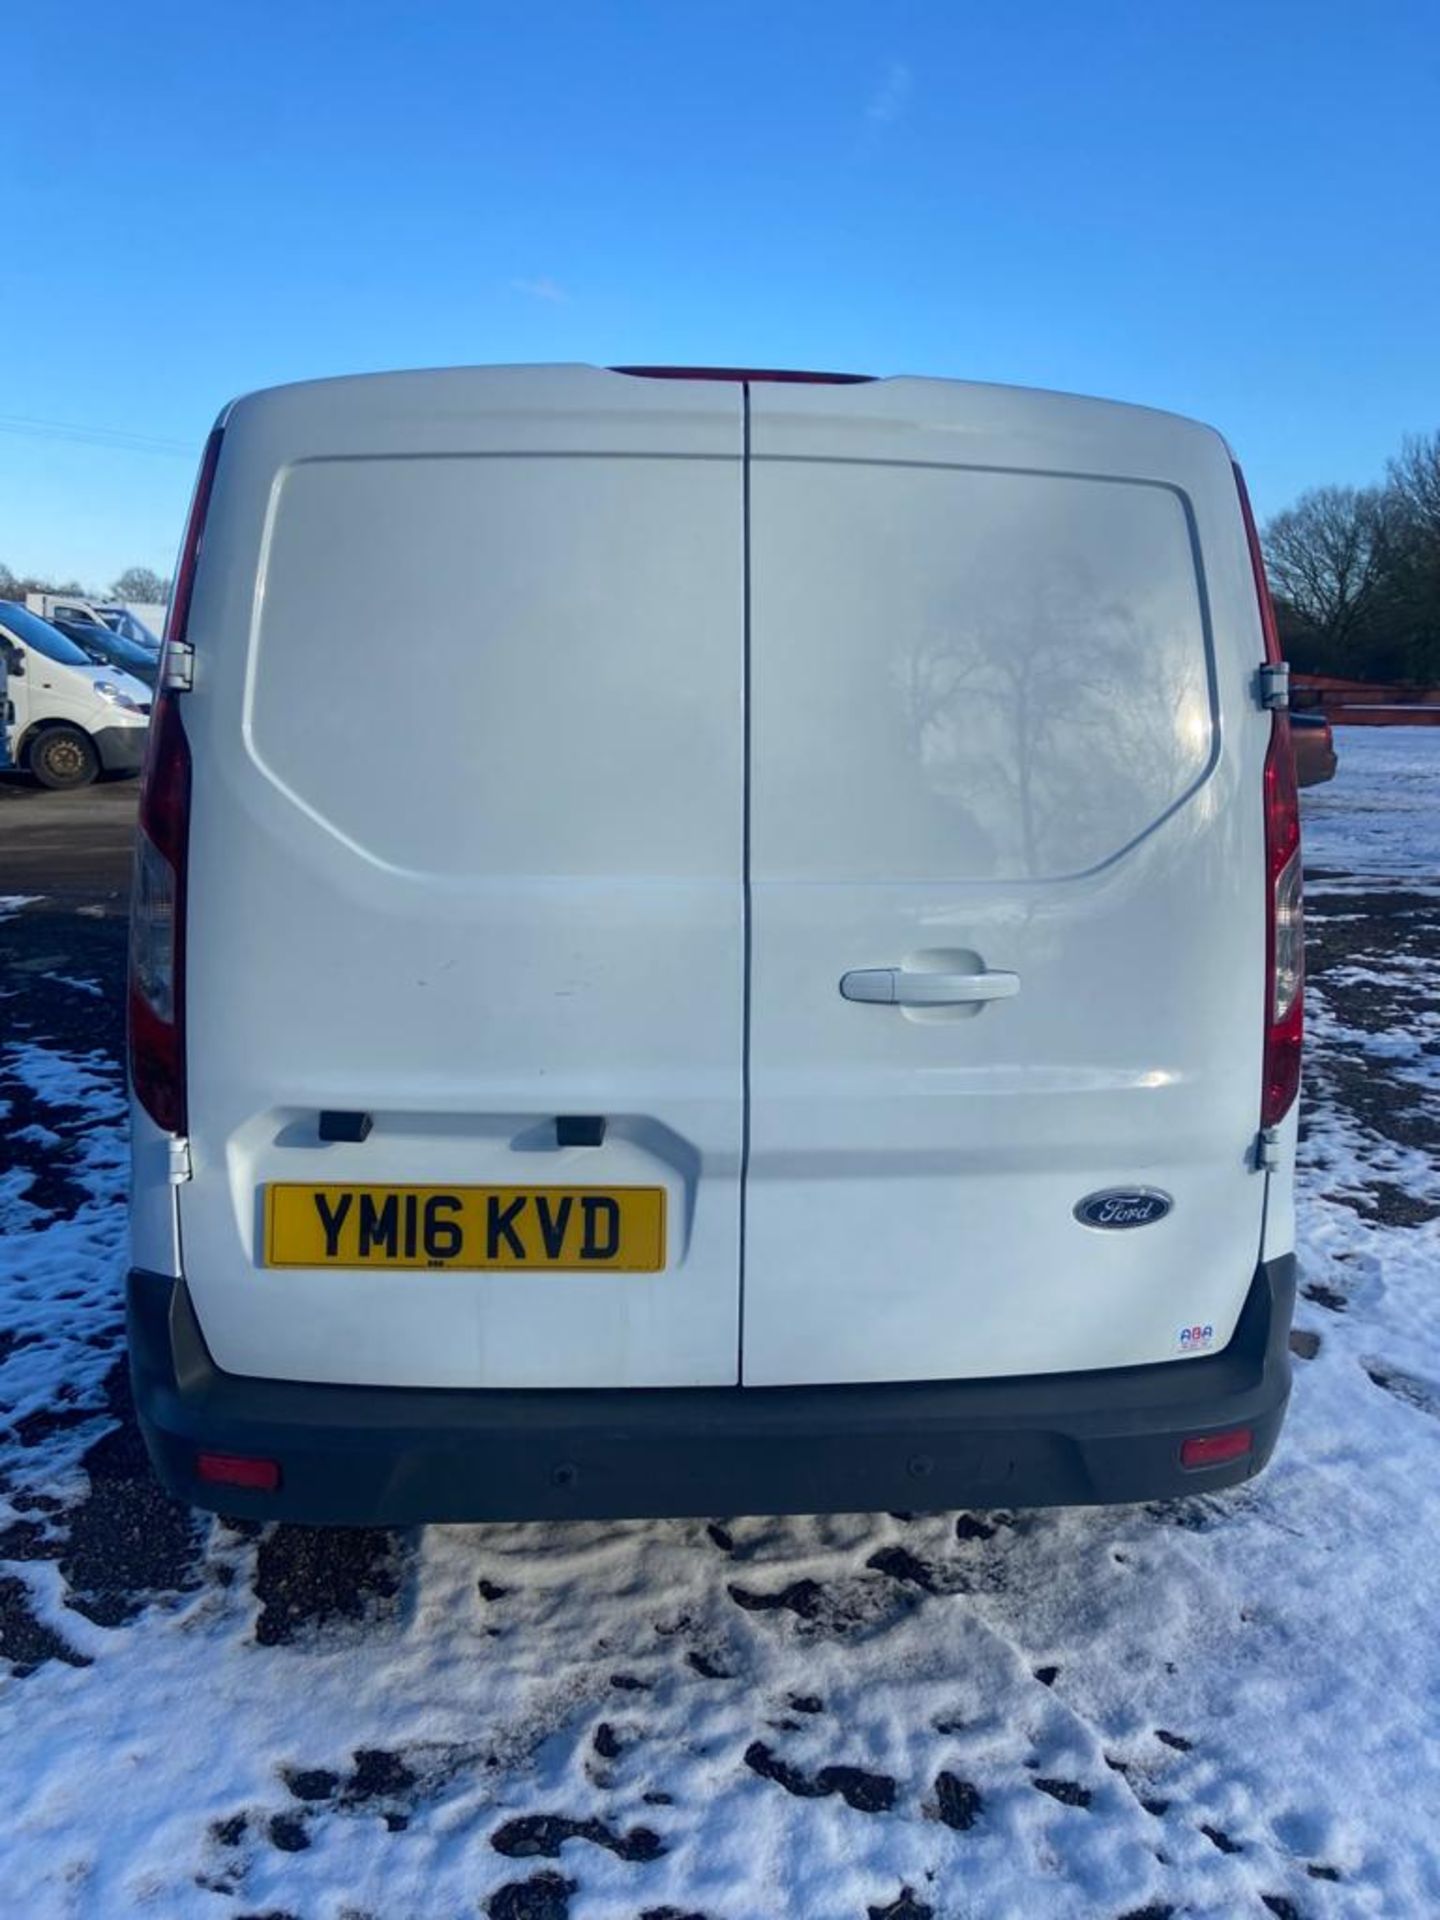 2016/16 REG FORD TRANSIT CONNECT 240 LIMITED 1.5 DIESEL LWB PANEL VAN, SHOWING 2 FORMER KEEPERS - Image 5 of 12